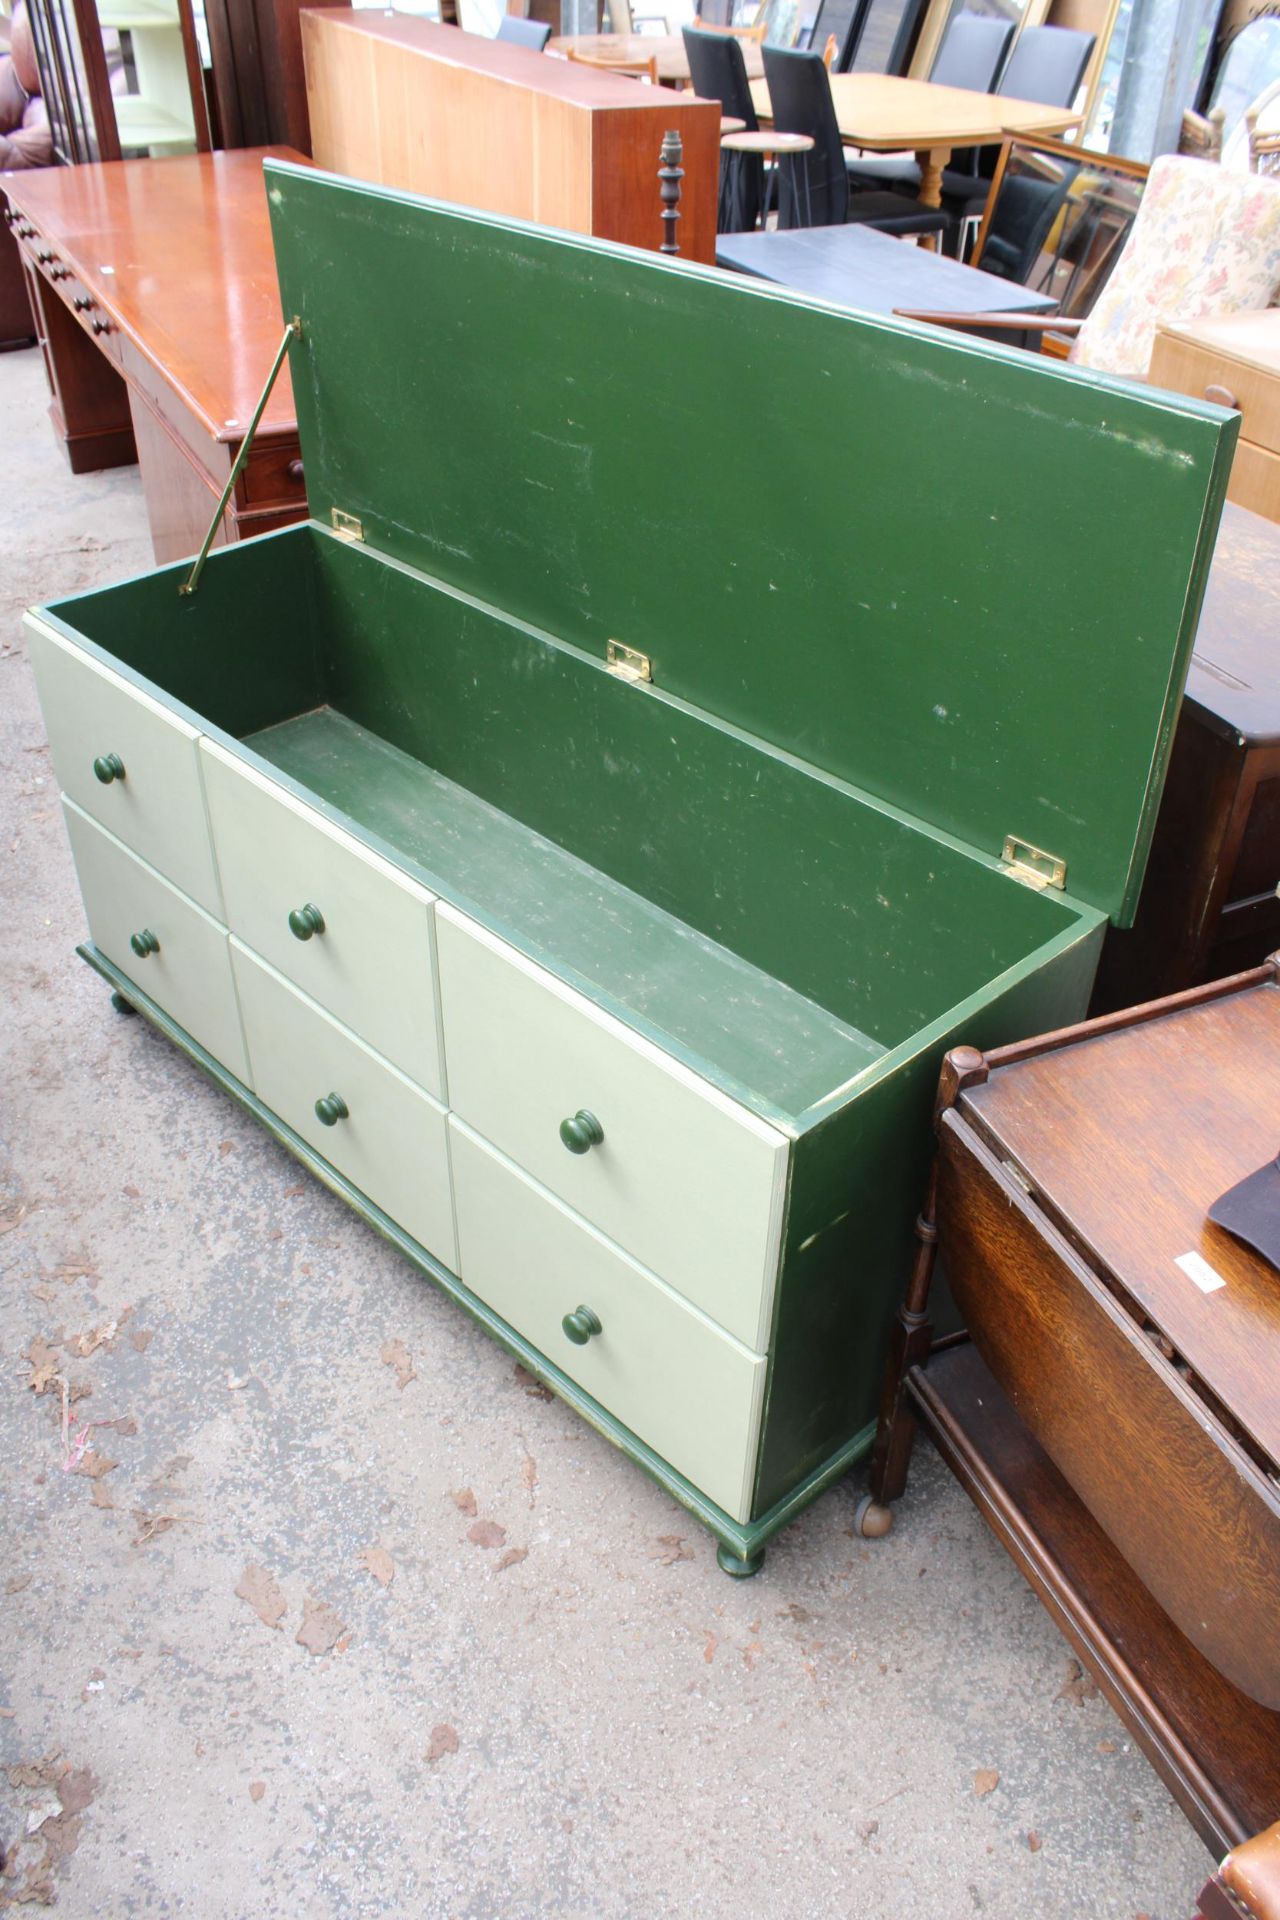 A VICTORIAN STYLE BLANKET CHEST WITH THREE DRAWERS AND THREE SHAM DRAWERS, 57" WIDE - Image 3 of 3